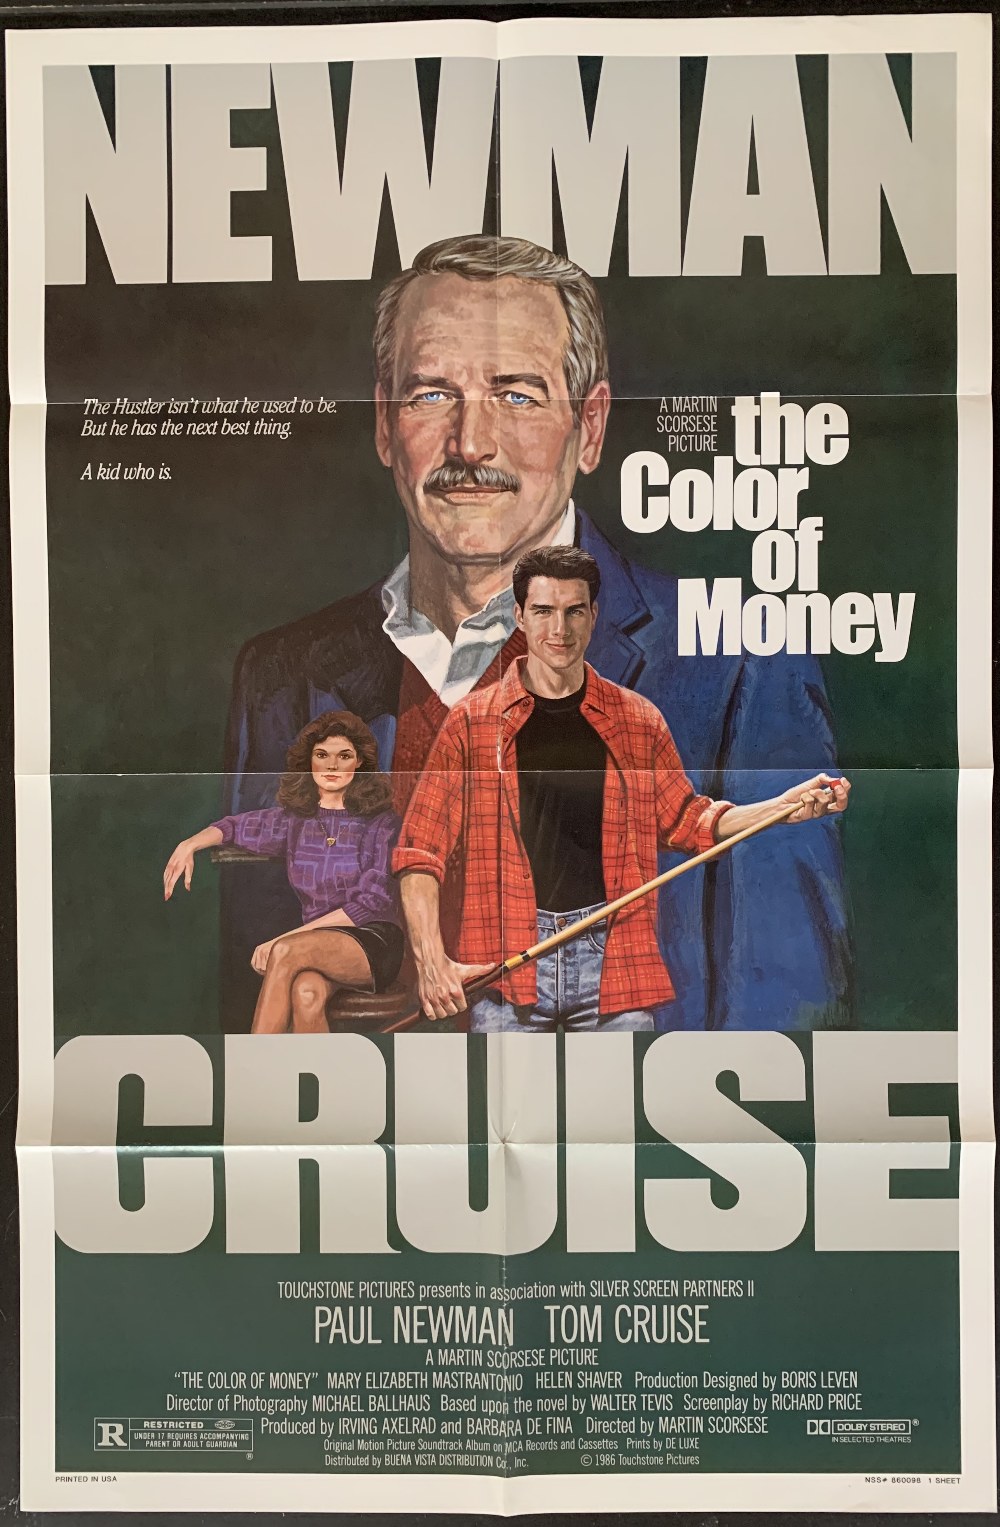 Cinema Poster:  The Colour of Money, [1986], directed by Martin Scorcese, starring Paul Newman and